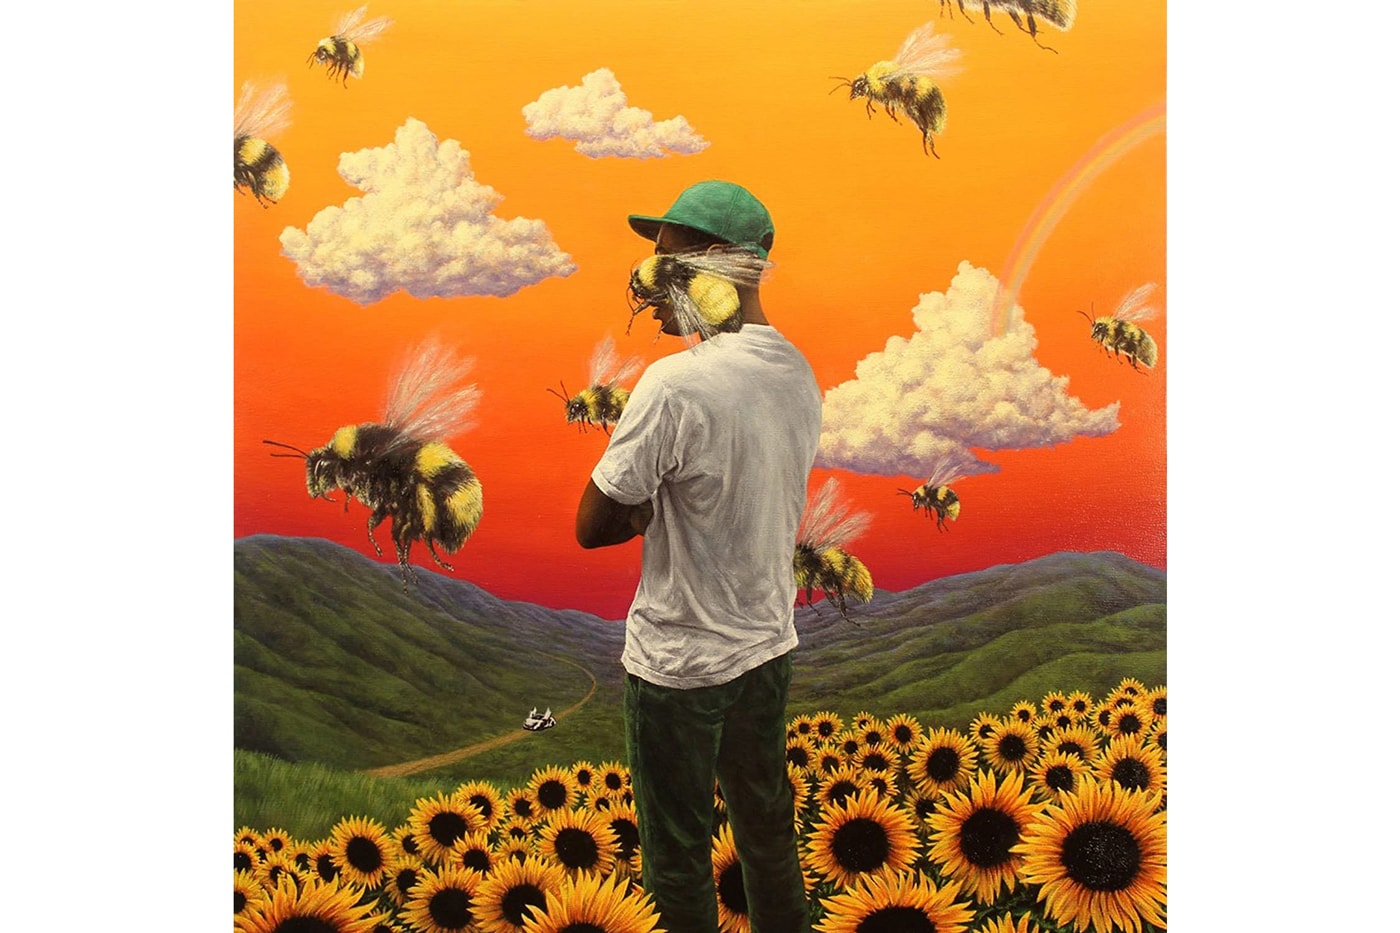 Credits Production Features Songwriting Tyler, the Creator New 2017 Album Flower Boy